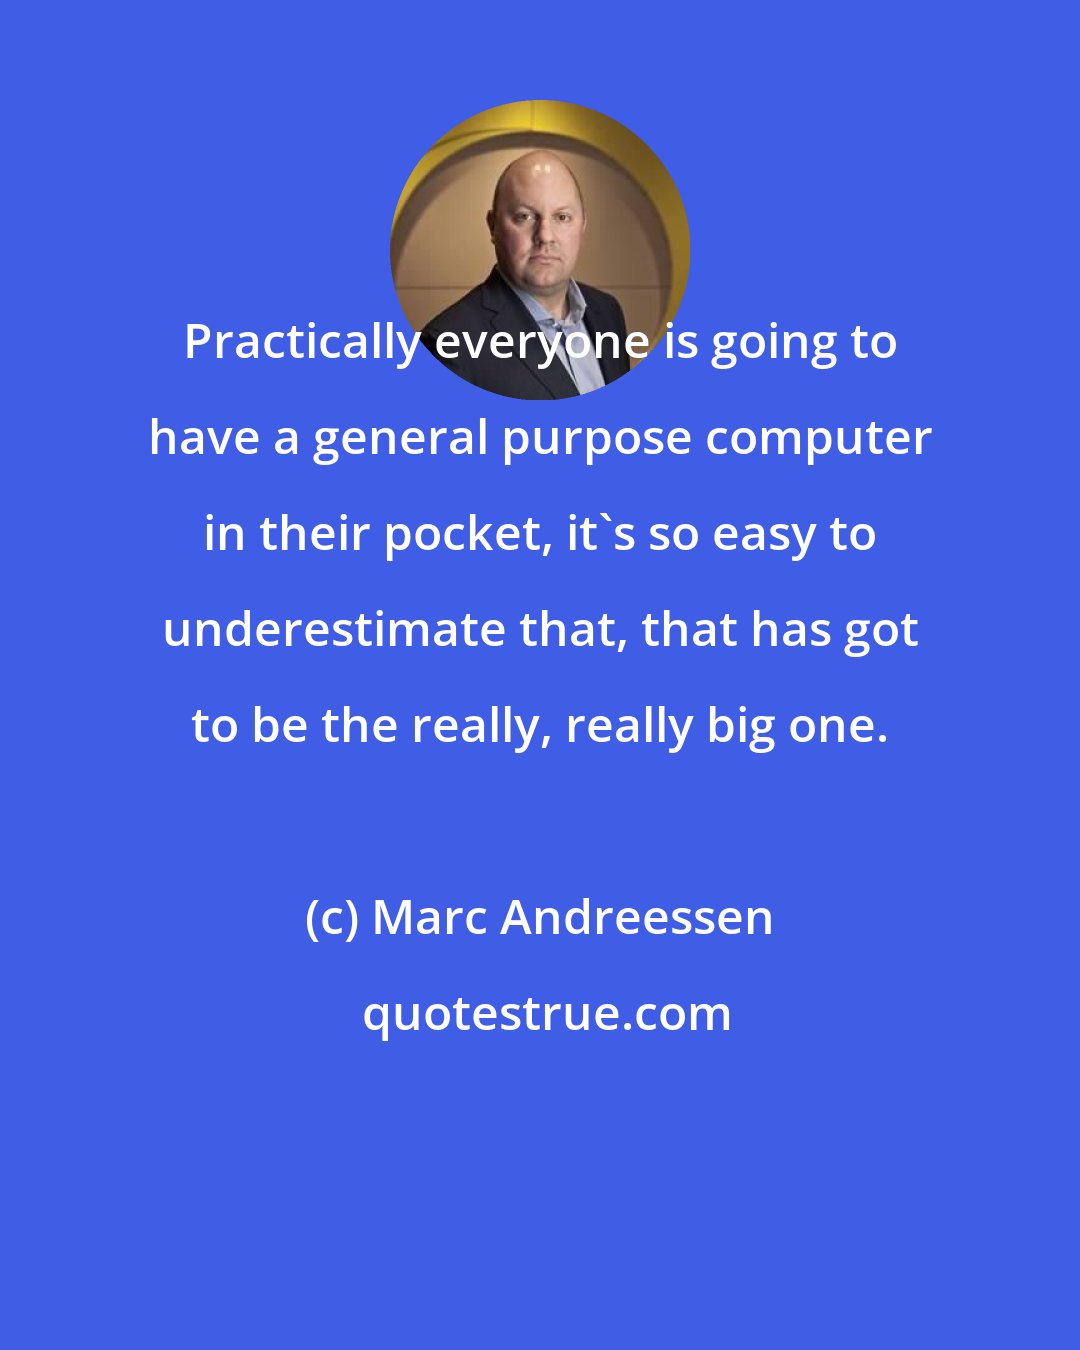 Marc Andreessen: Practically everyone is going to have a general purpose computer in their pocket, it's so easy to underestimate that, that has got to be the really, really big one.